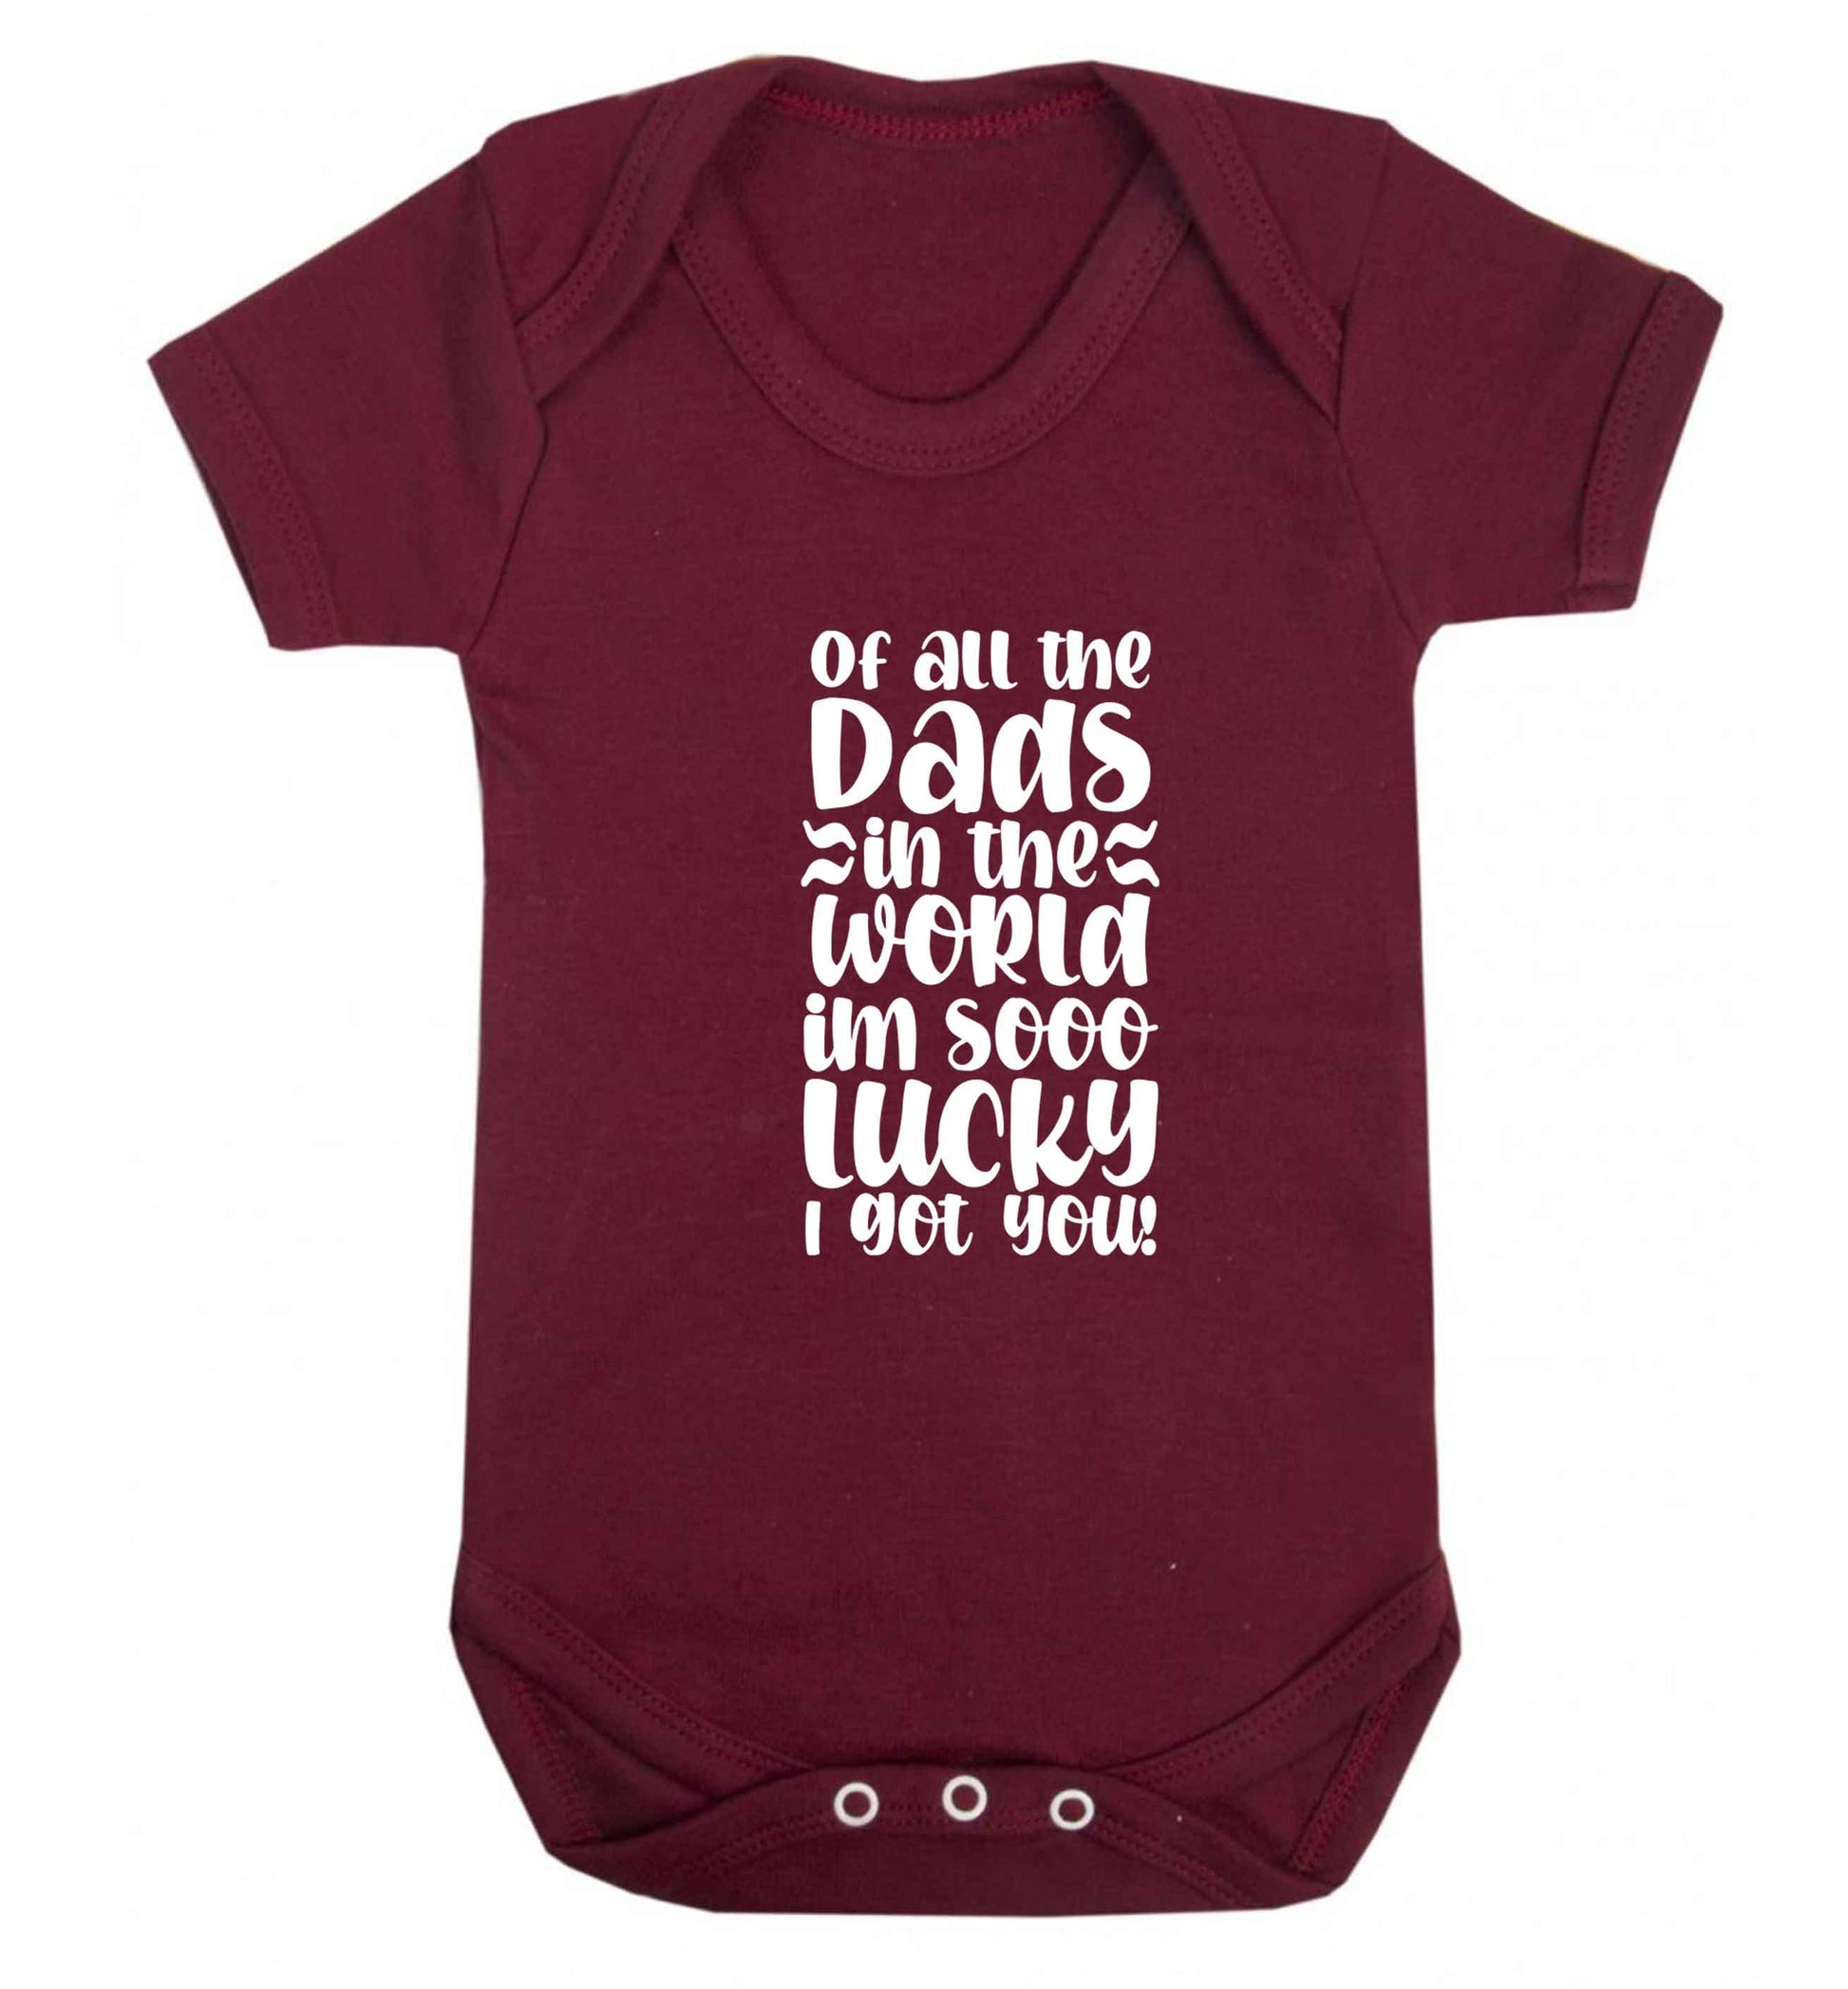 I'm as lucky as can be the worlds greatest dad belongs to me! baby vest maroon 18-24 months